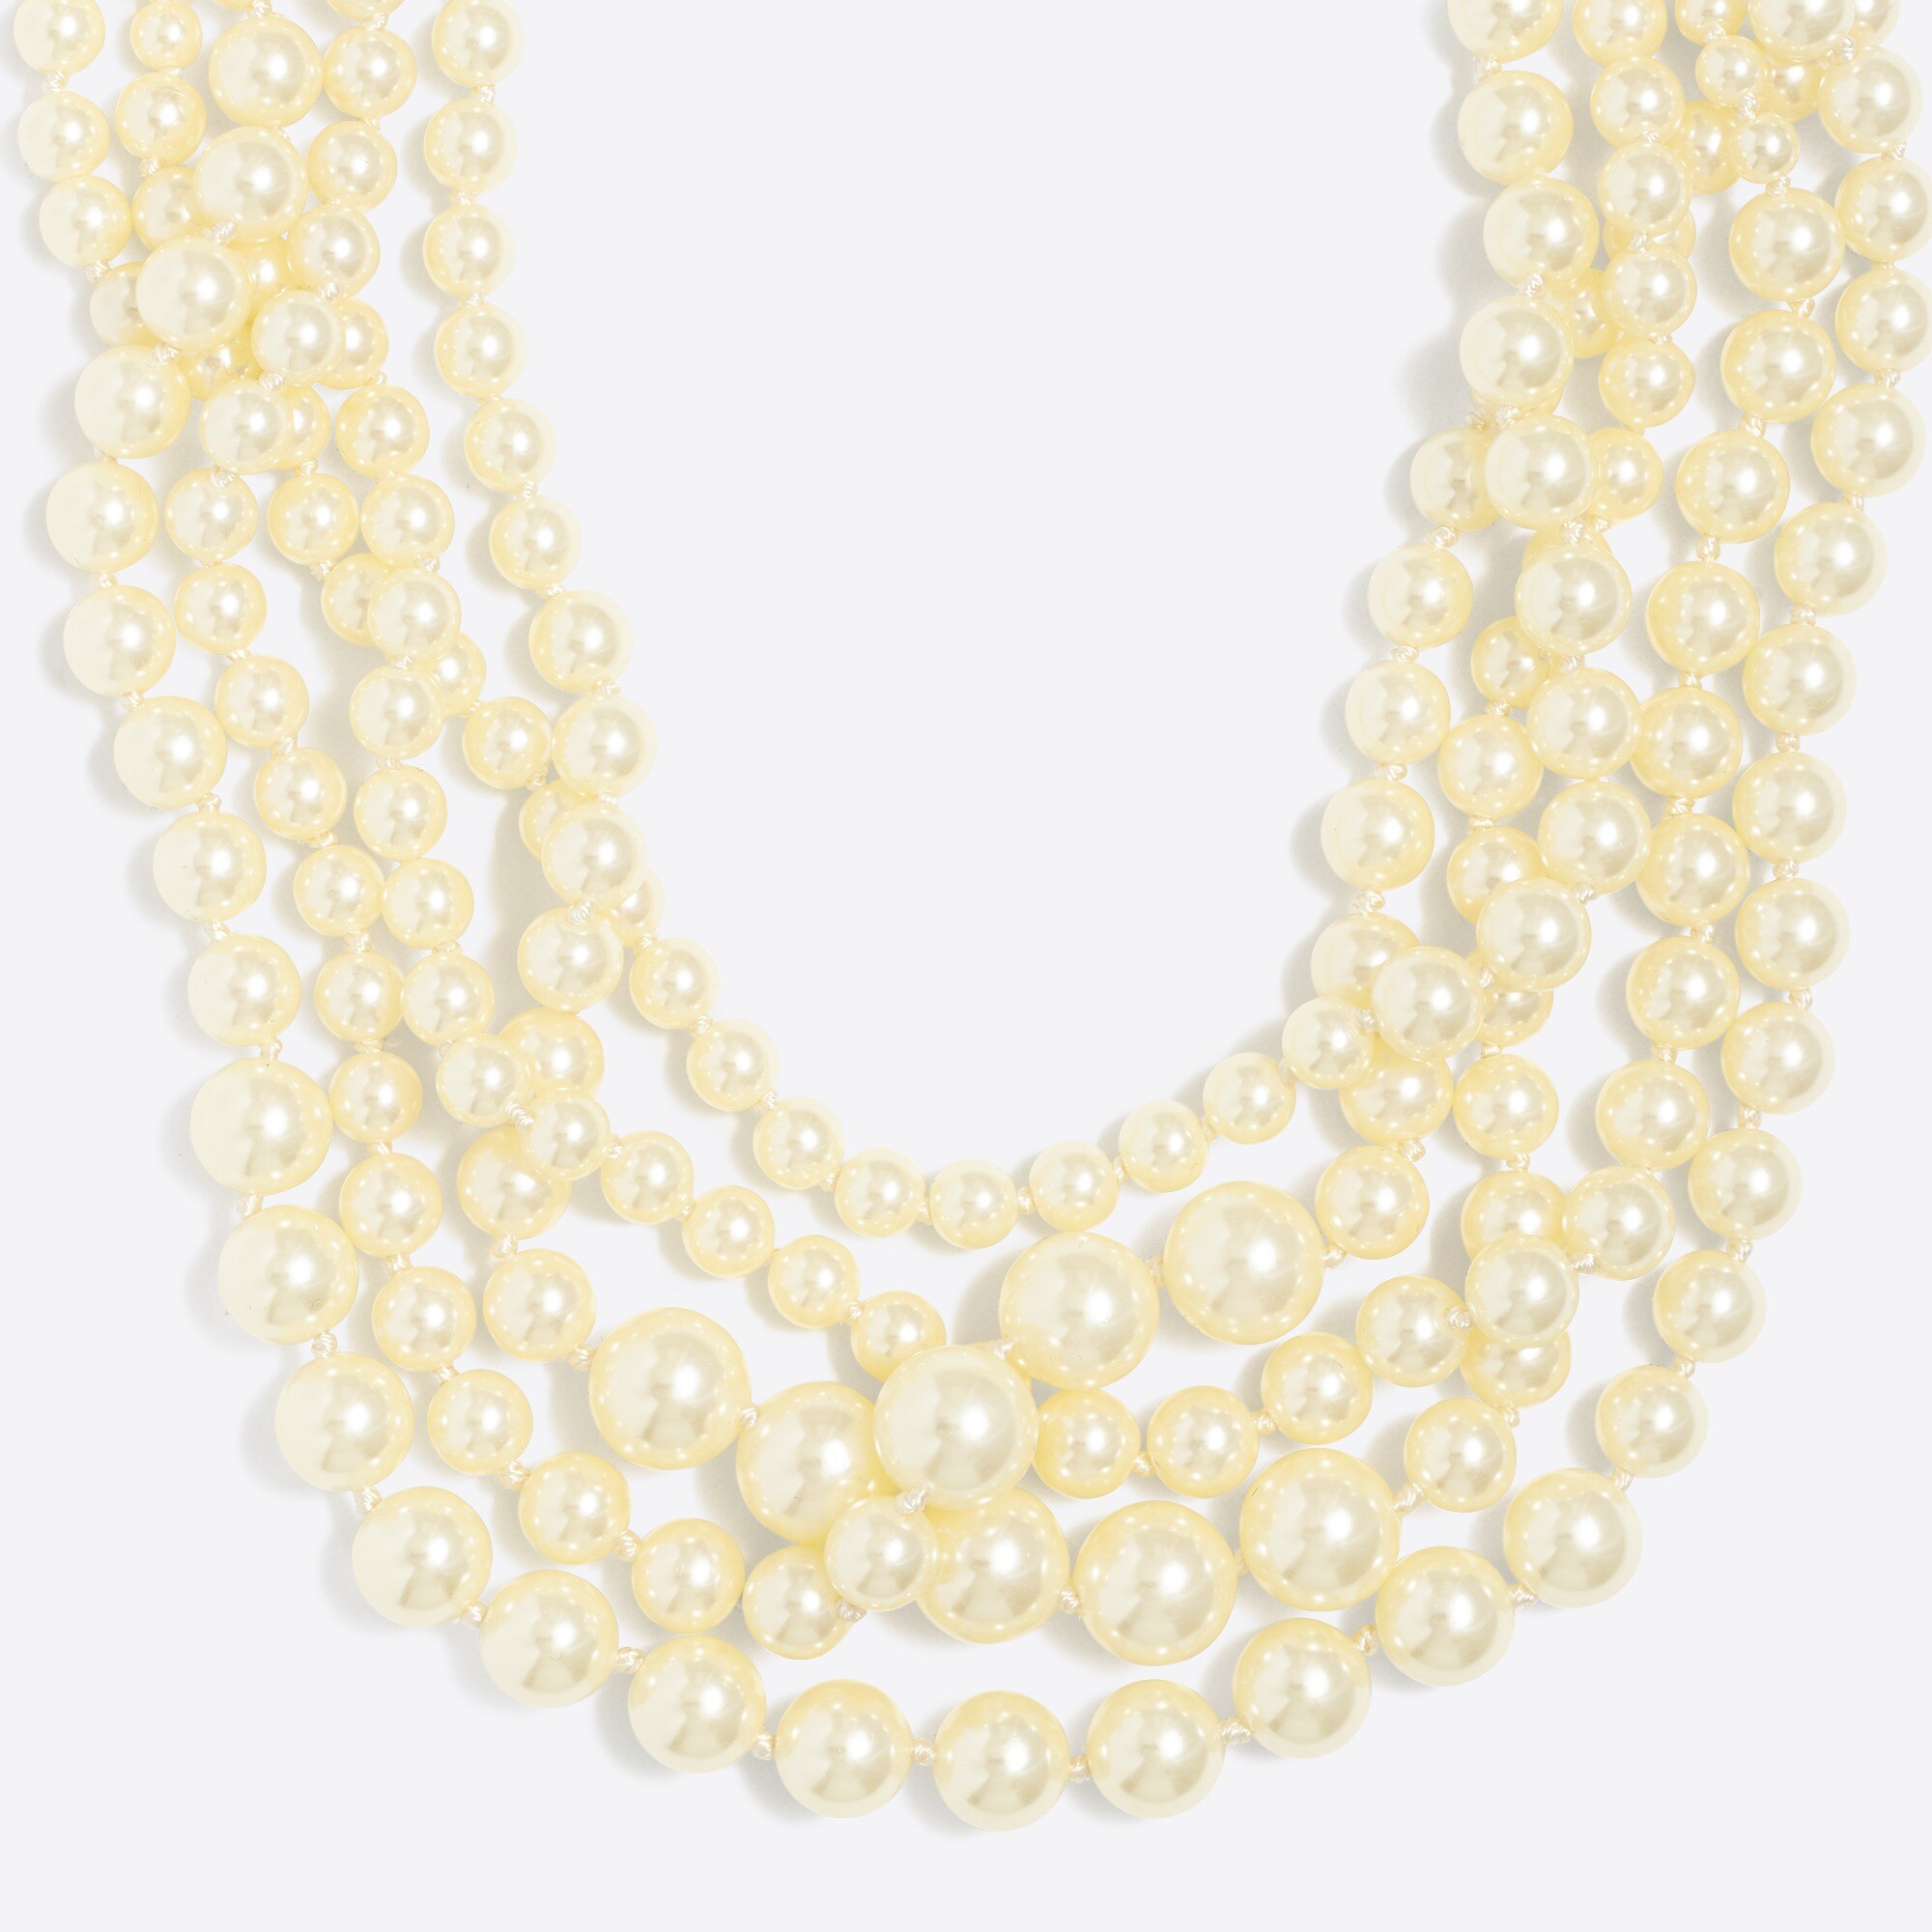  Multistrand pearl necklace